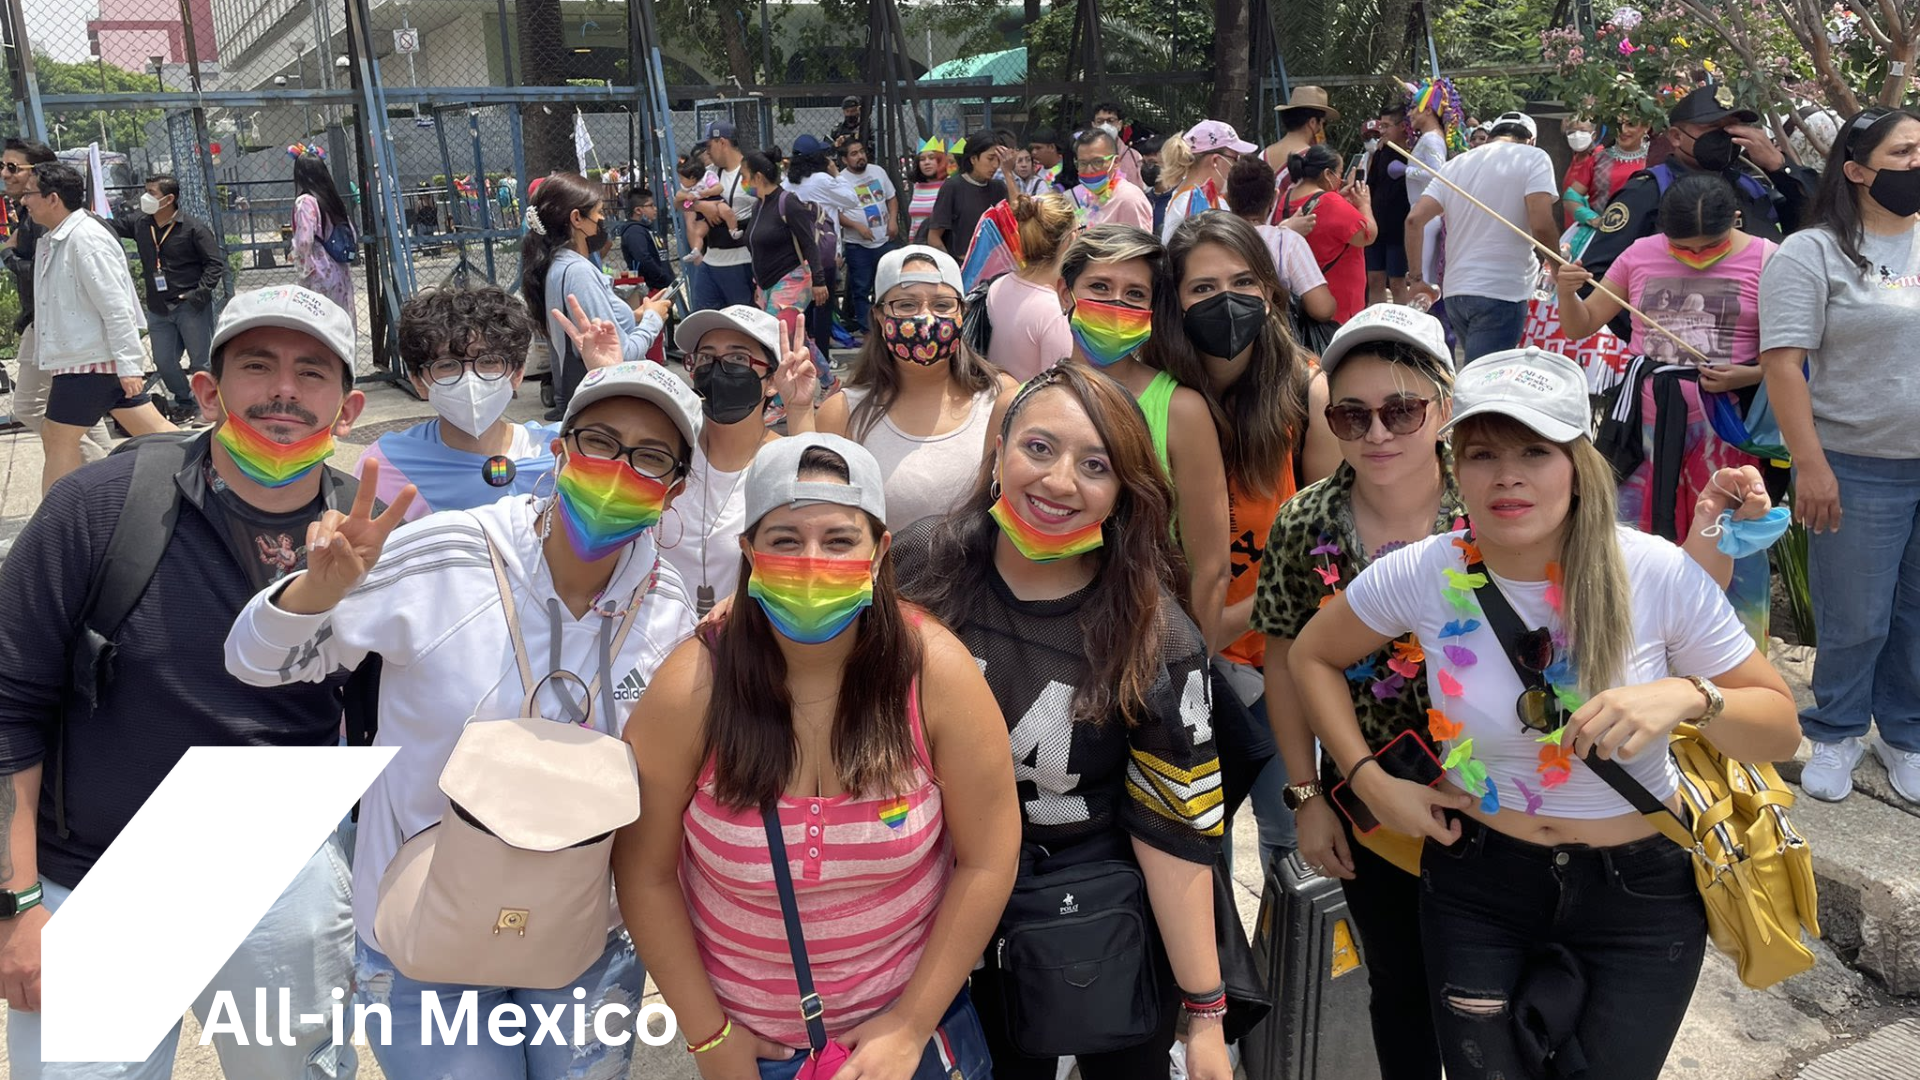 Group photo of Inclusion group: All-in Mexico ERG at Pride wearing rainbow face masks